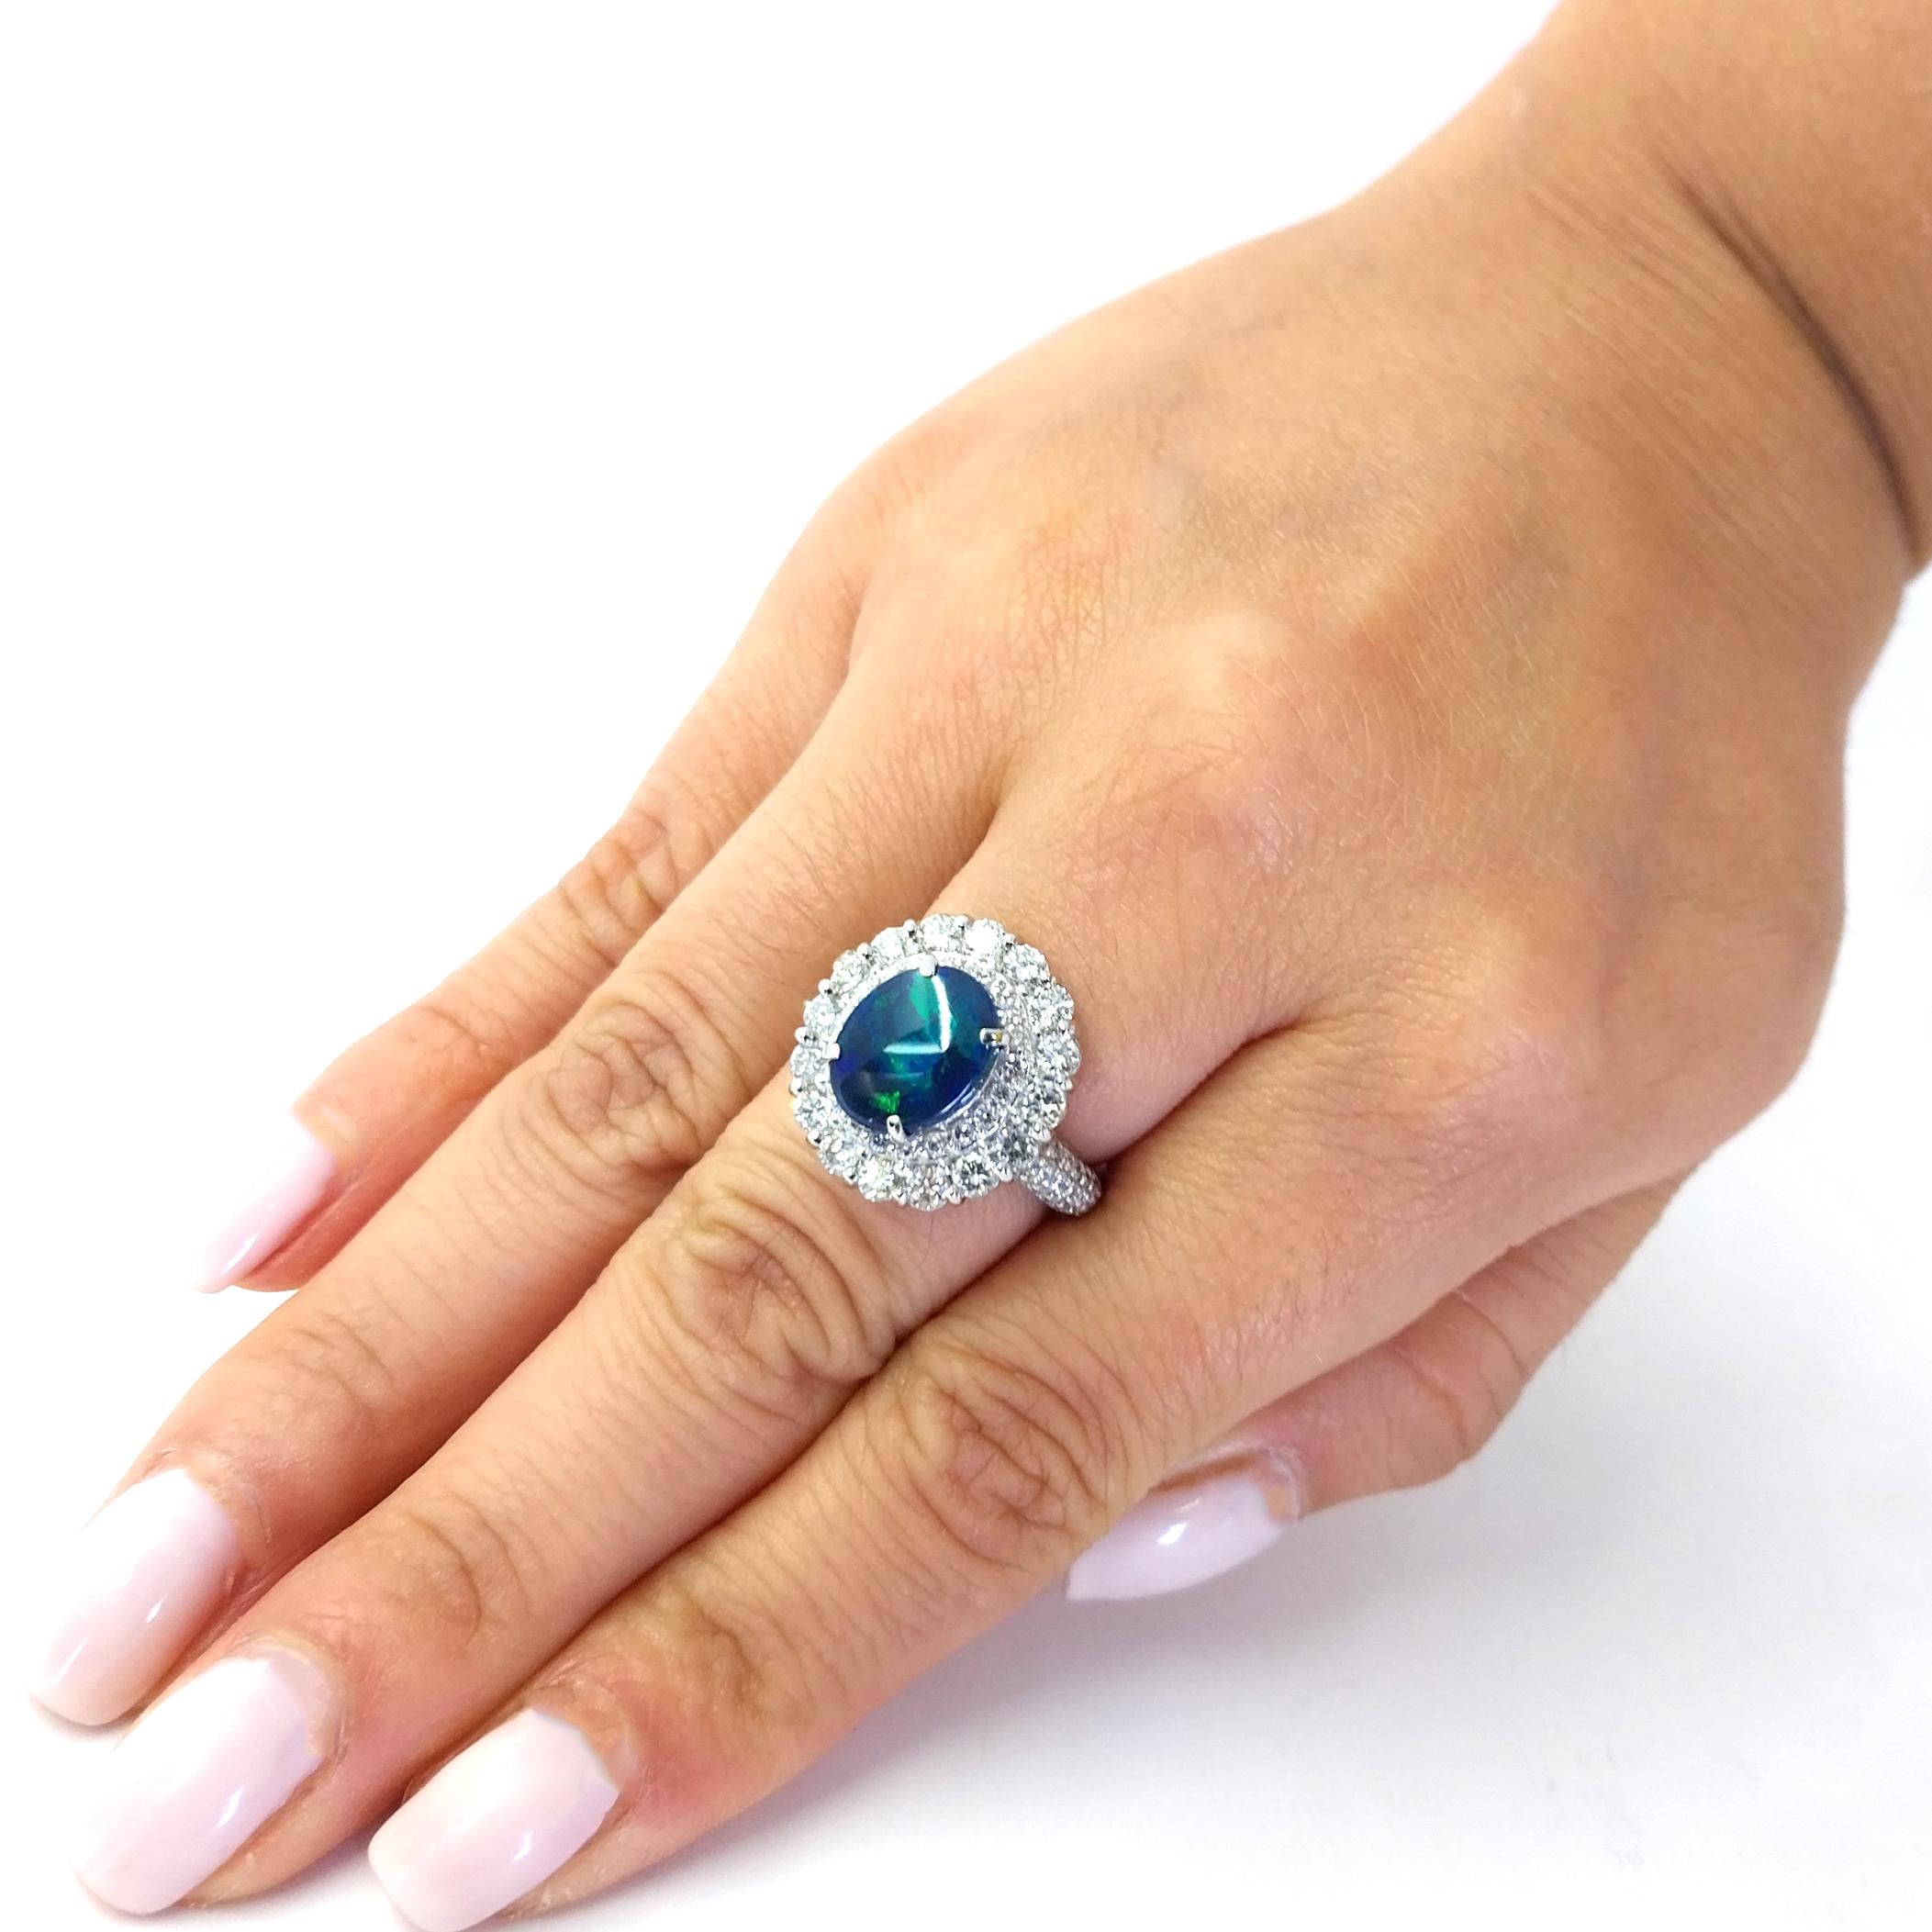 Platinum Lightning Ridge Opal Ring Featuring A 2.30 Carat Oval Australian Opal with Beautiful Blue and Green Play of Color, Accented by 1.10 Carat Total Weight Round Diamonds of SI Clarity and G/H Color. Finger Size 5.75. Purchase Includes One